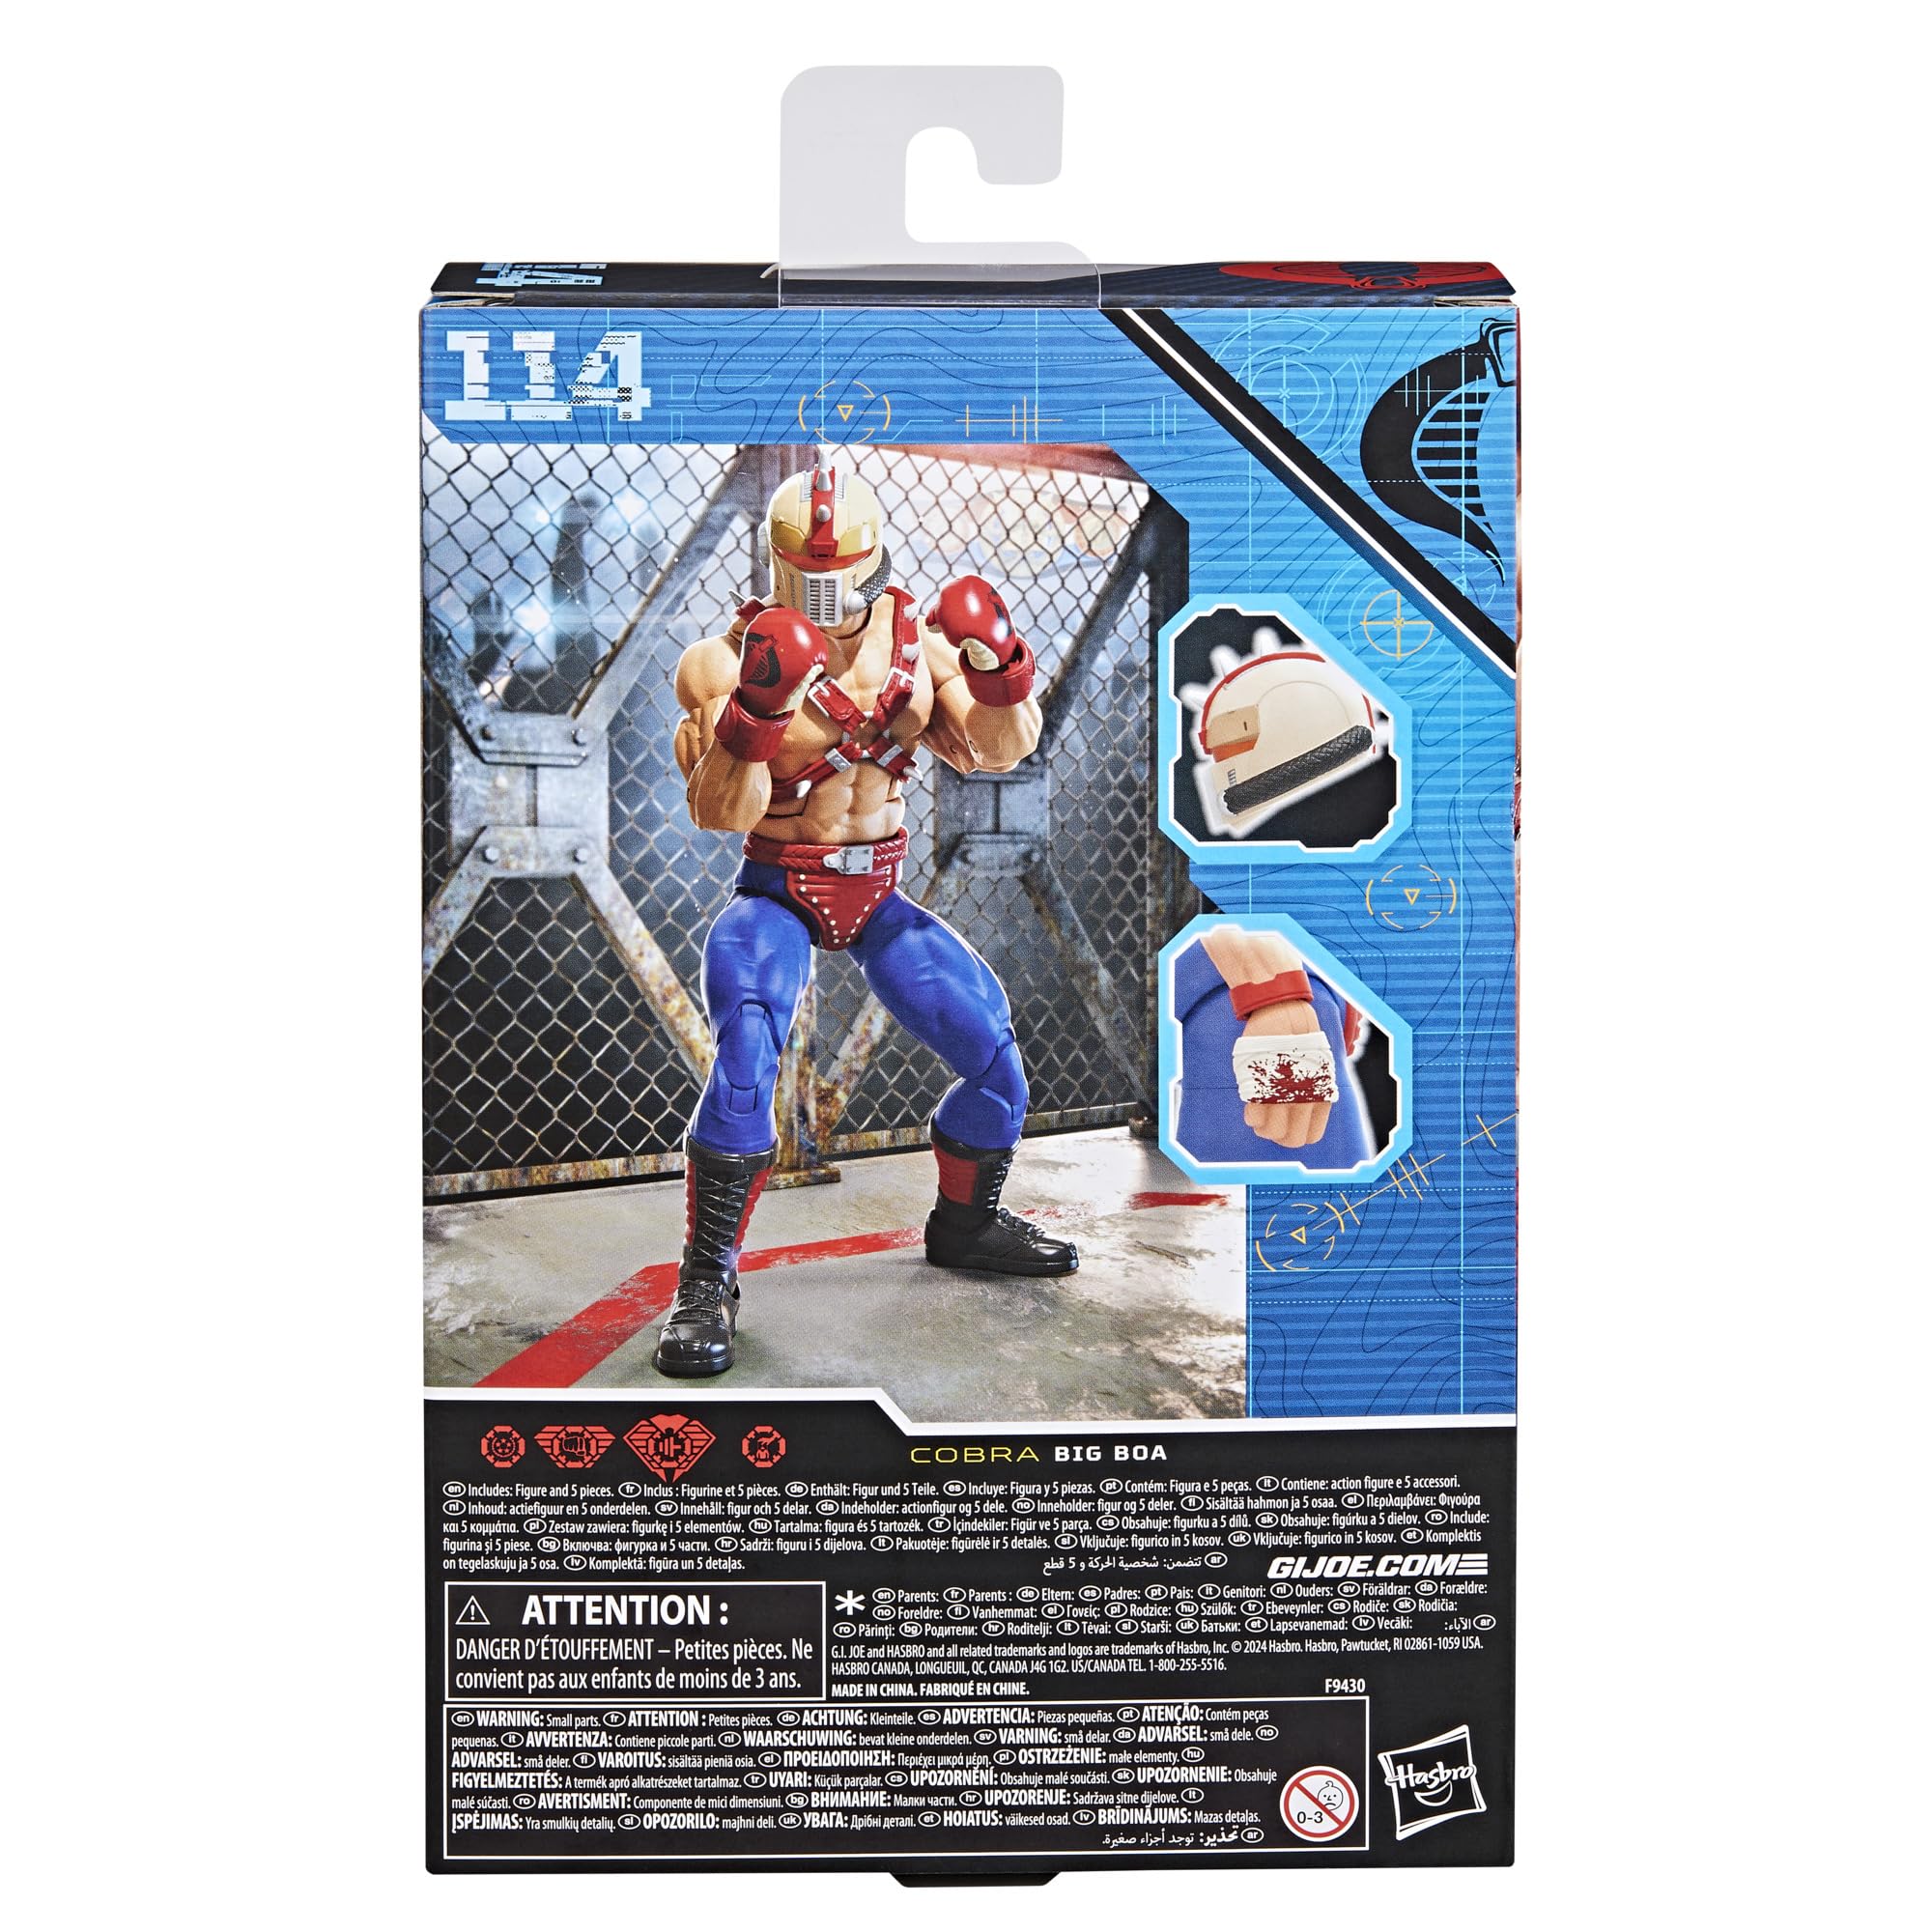 G.I. Joe Classified Series #114, Big Boa, Collectible 6-Inch Action Figure with 5 Accessories